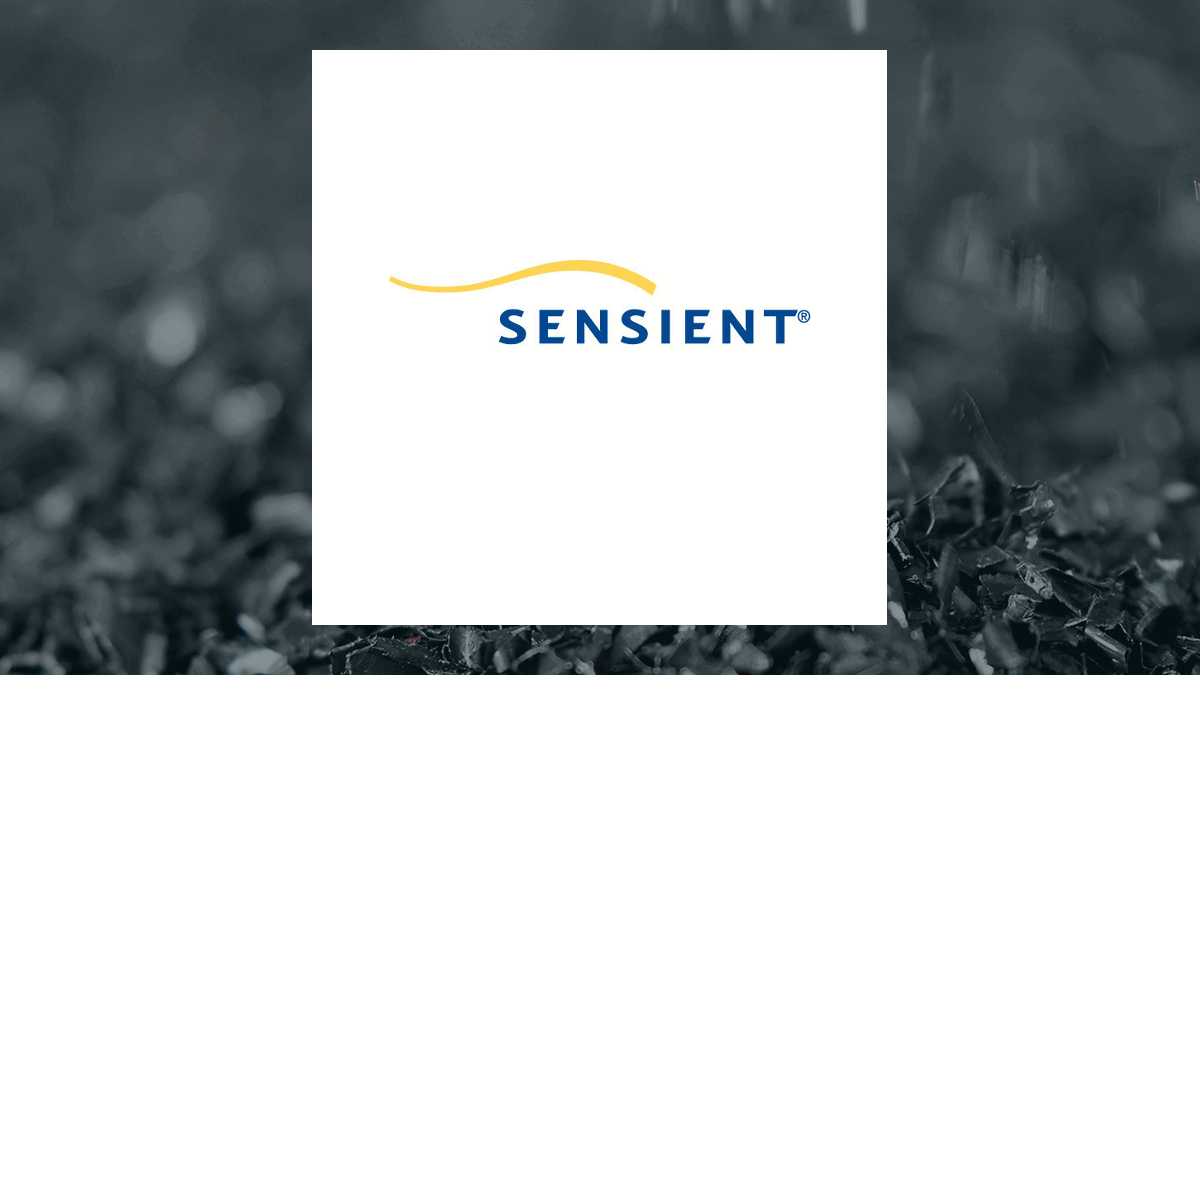 Sensient Technologies logo with Basic Materials background